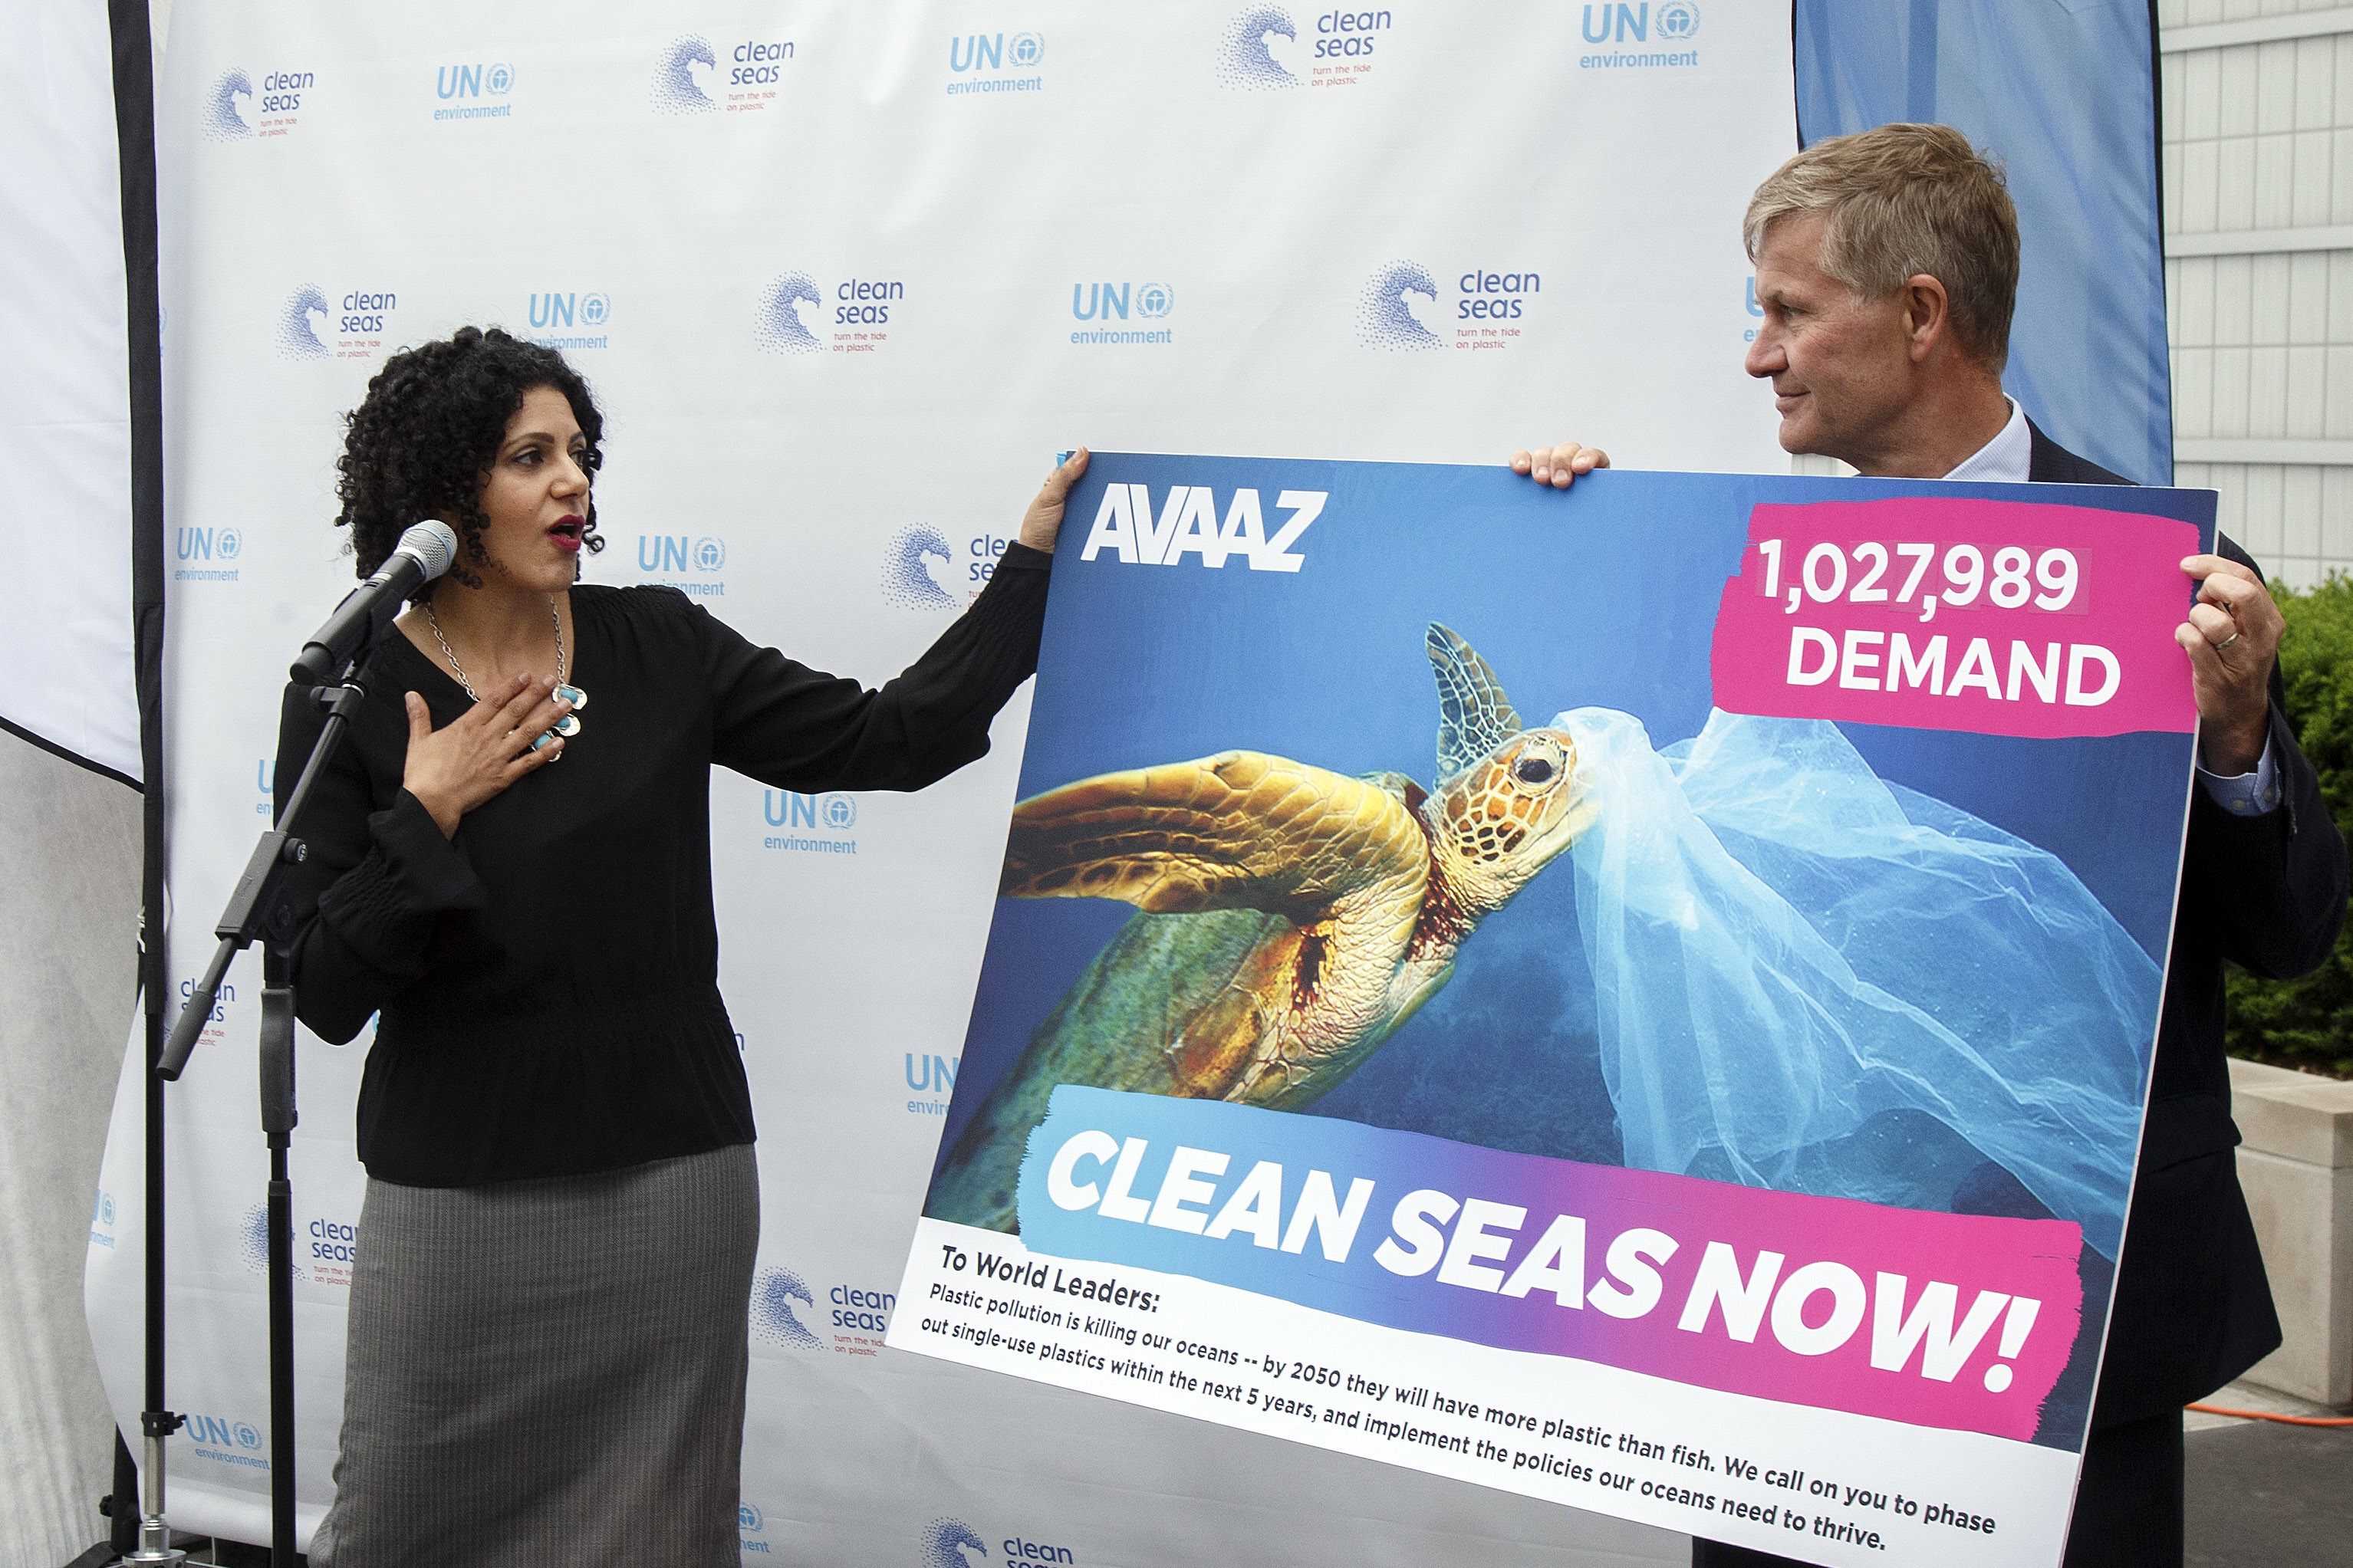 IMAGE DISTRIBUTED FOR AVAAZ - United Nations Environment head Erik Solheim receives an AVAAZ petition signed by over one million people urging action to reduce plastic pollution in the world's oceans, Tuesday, June 6, 2017, at U.N. Headquarters. (Jason DeCrow/AP Images for AVAAZ)